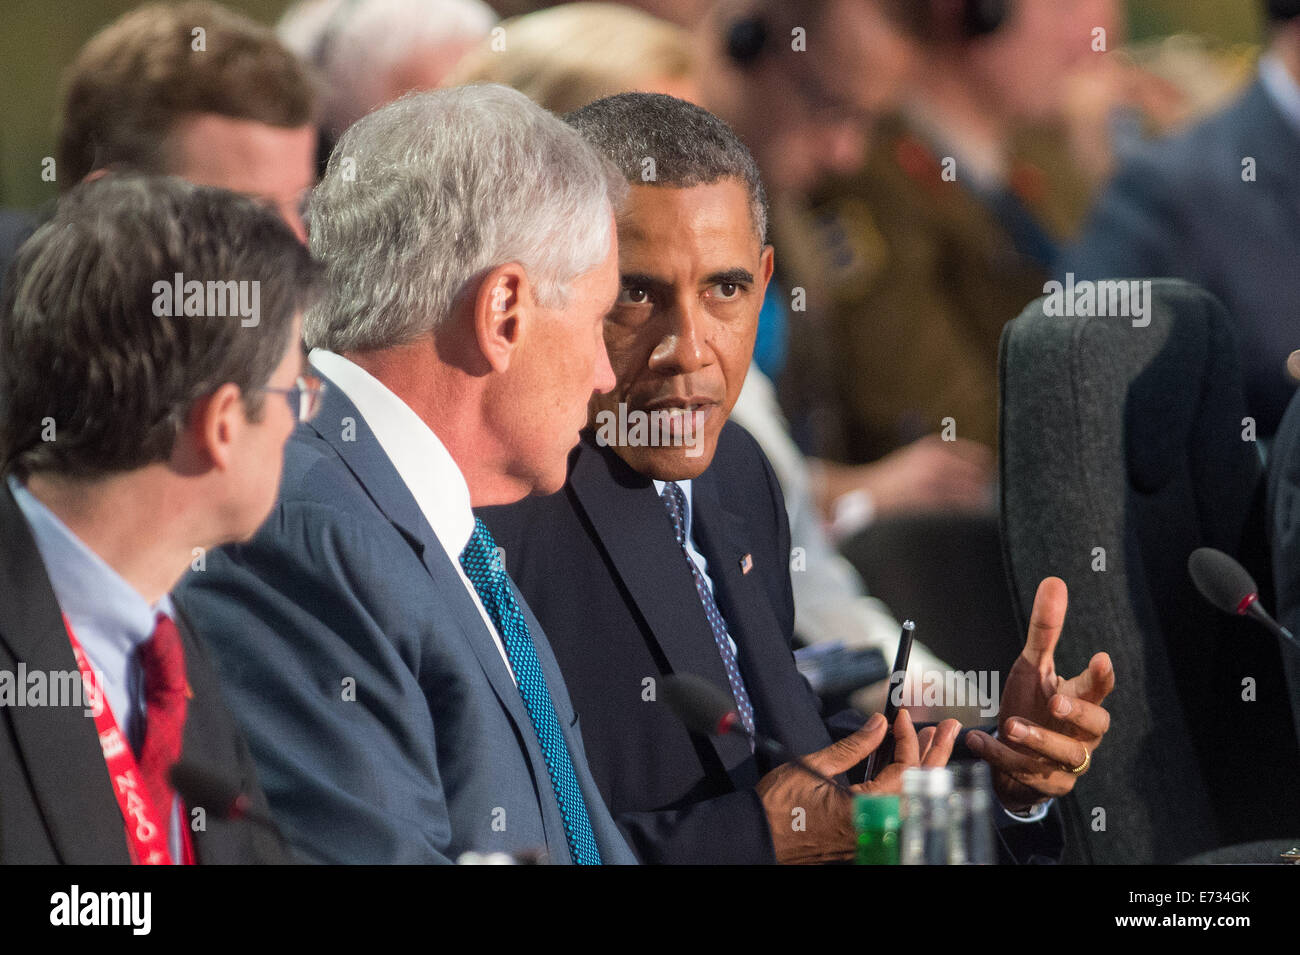 Newport, South Wales. 04th Sep, 2014. US defence minister Chuck Hagel (L) and US president Barack Obama participate during the NATO summit in Newport, South Wales, 04 September 2014. World leaders from about 60 countries are coming together for a two-day NATO summit taking place from 04 to 05 September 2014. Photo: Maurizio Gambarini/dpa/Alamy Live News Stock Photo